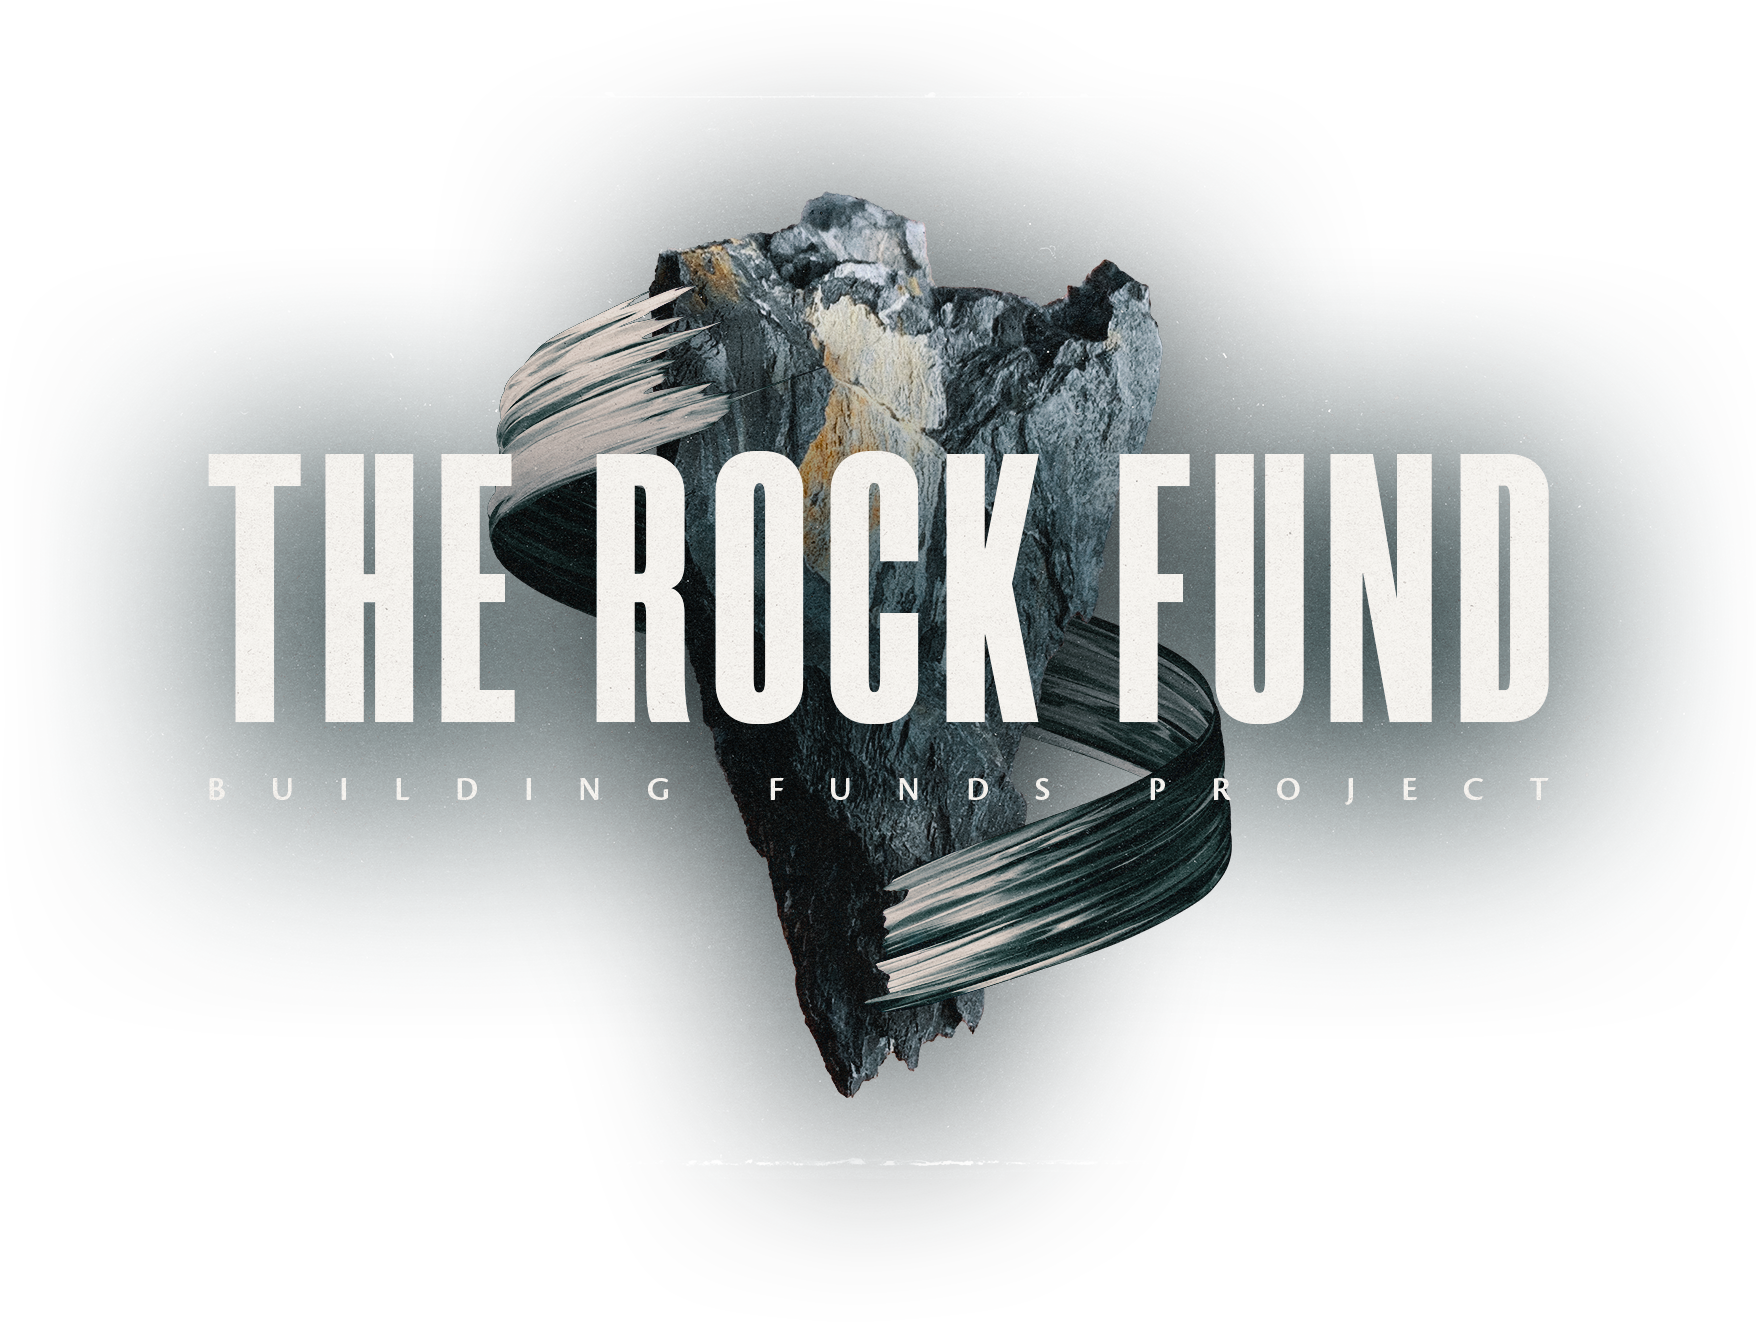 The Rock funds